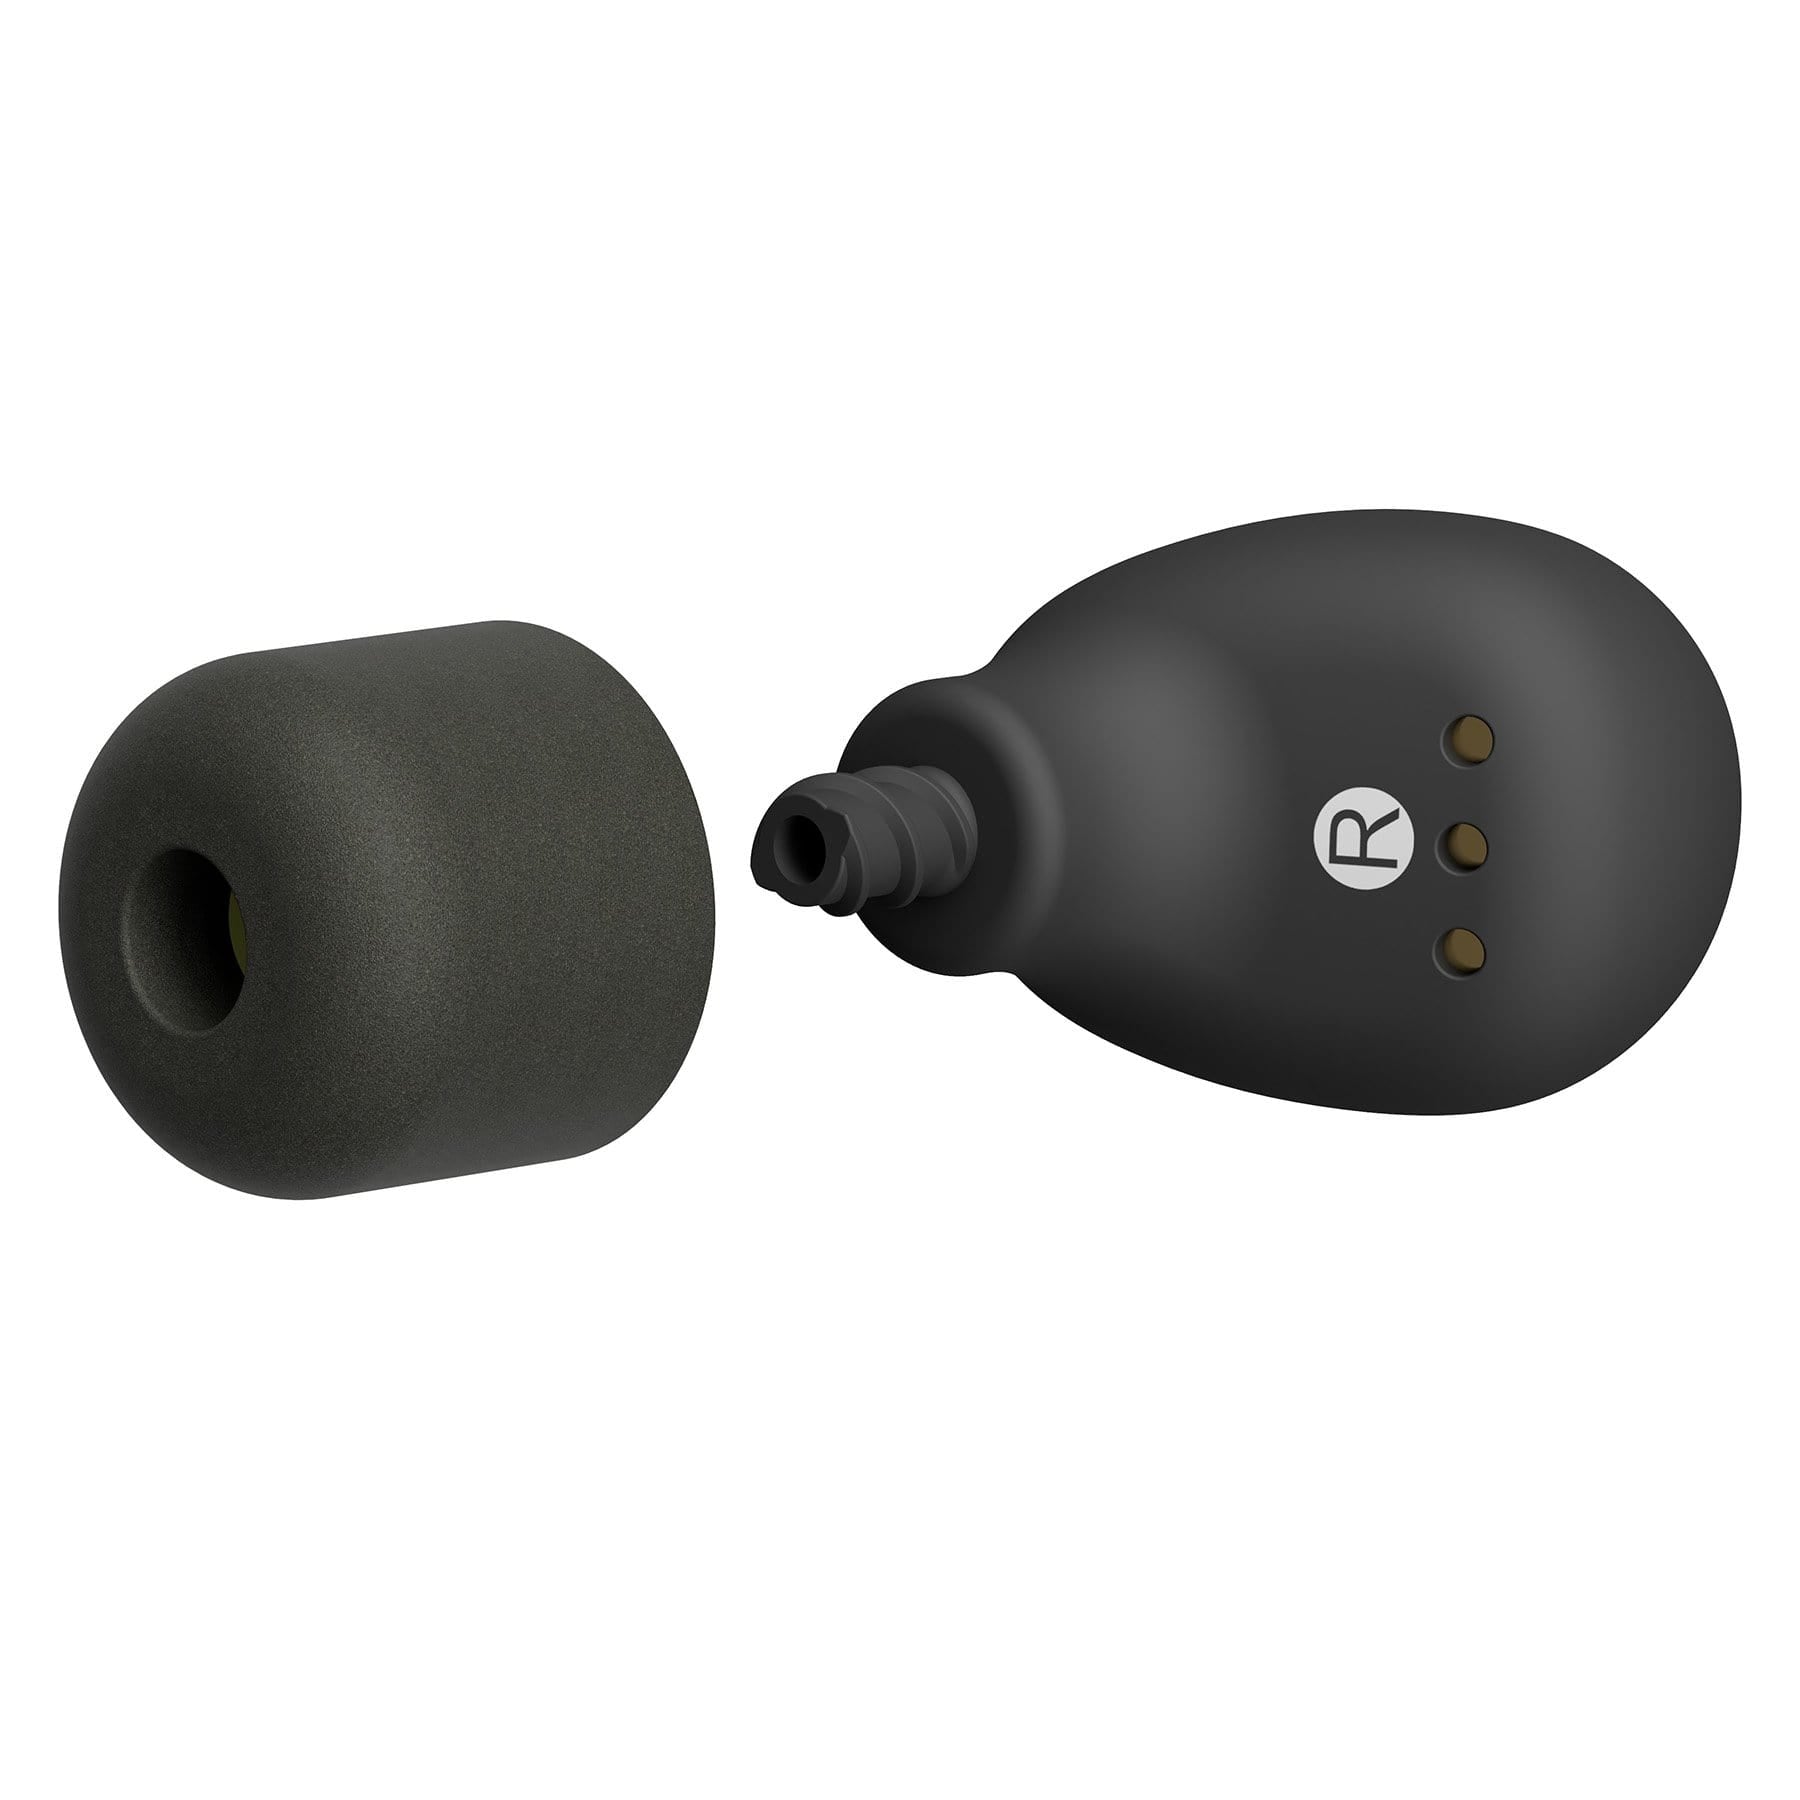 ISOtunes Black FREE Wireless Earbuds with Bluetooth Technology for Hearing Protection